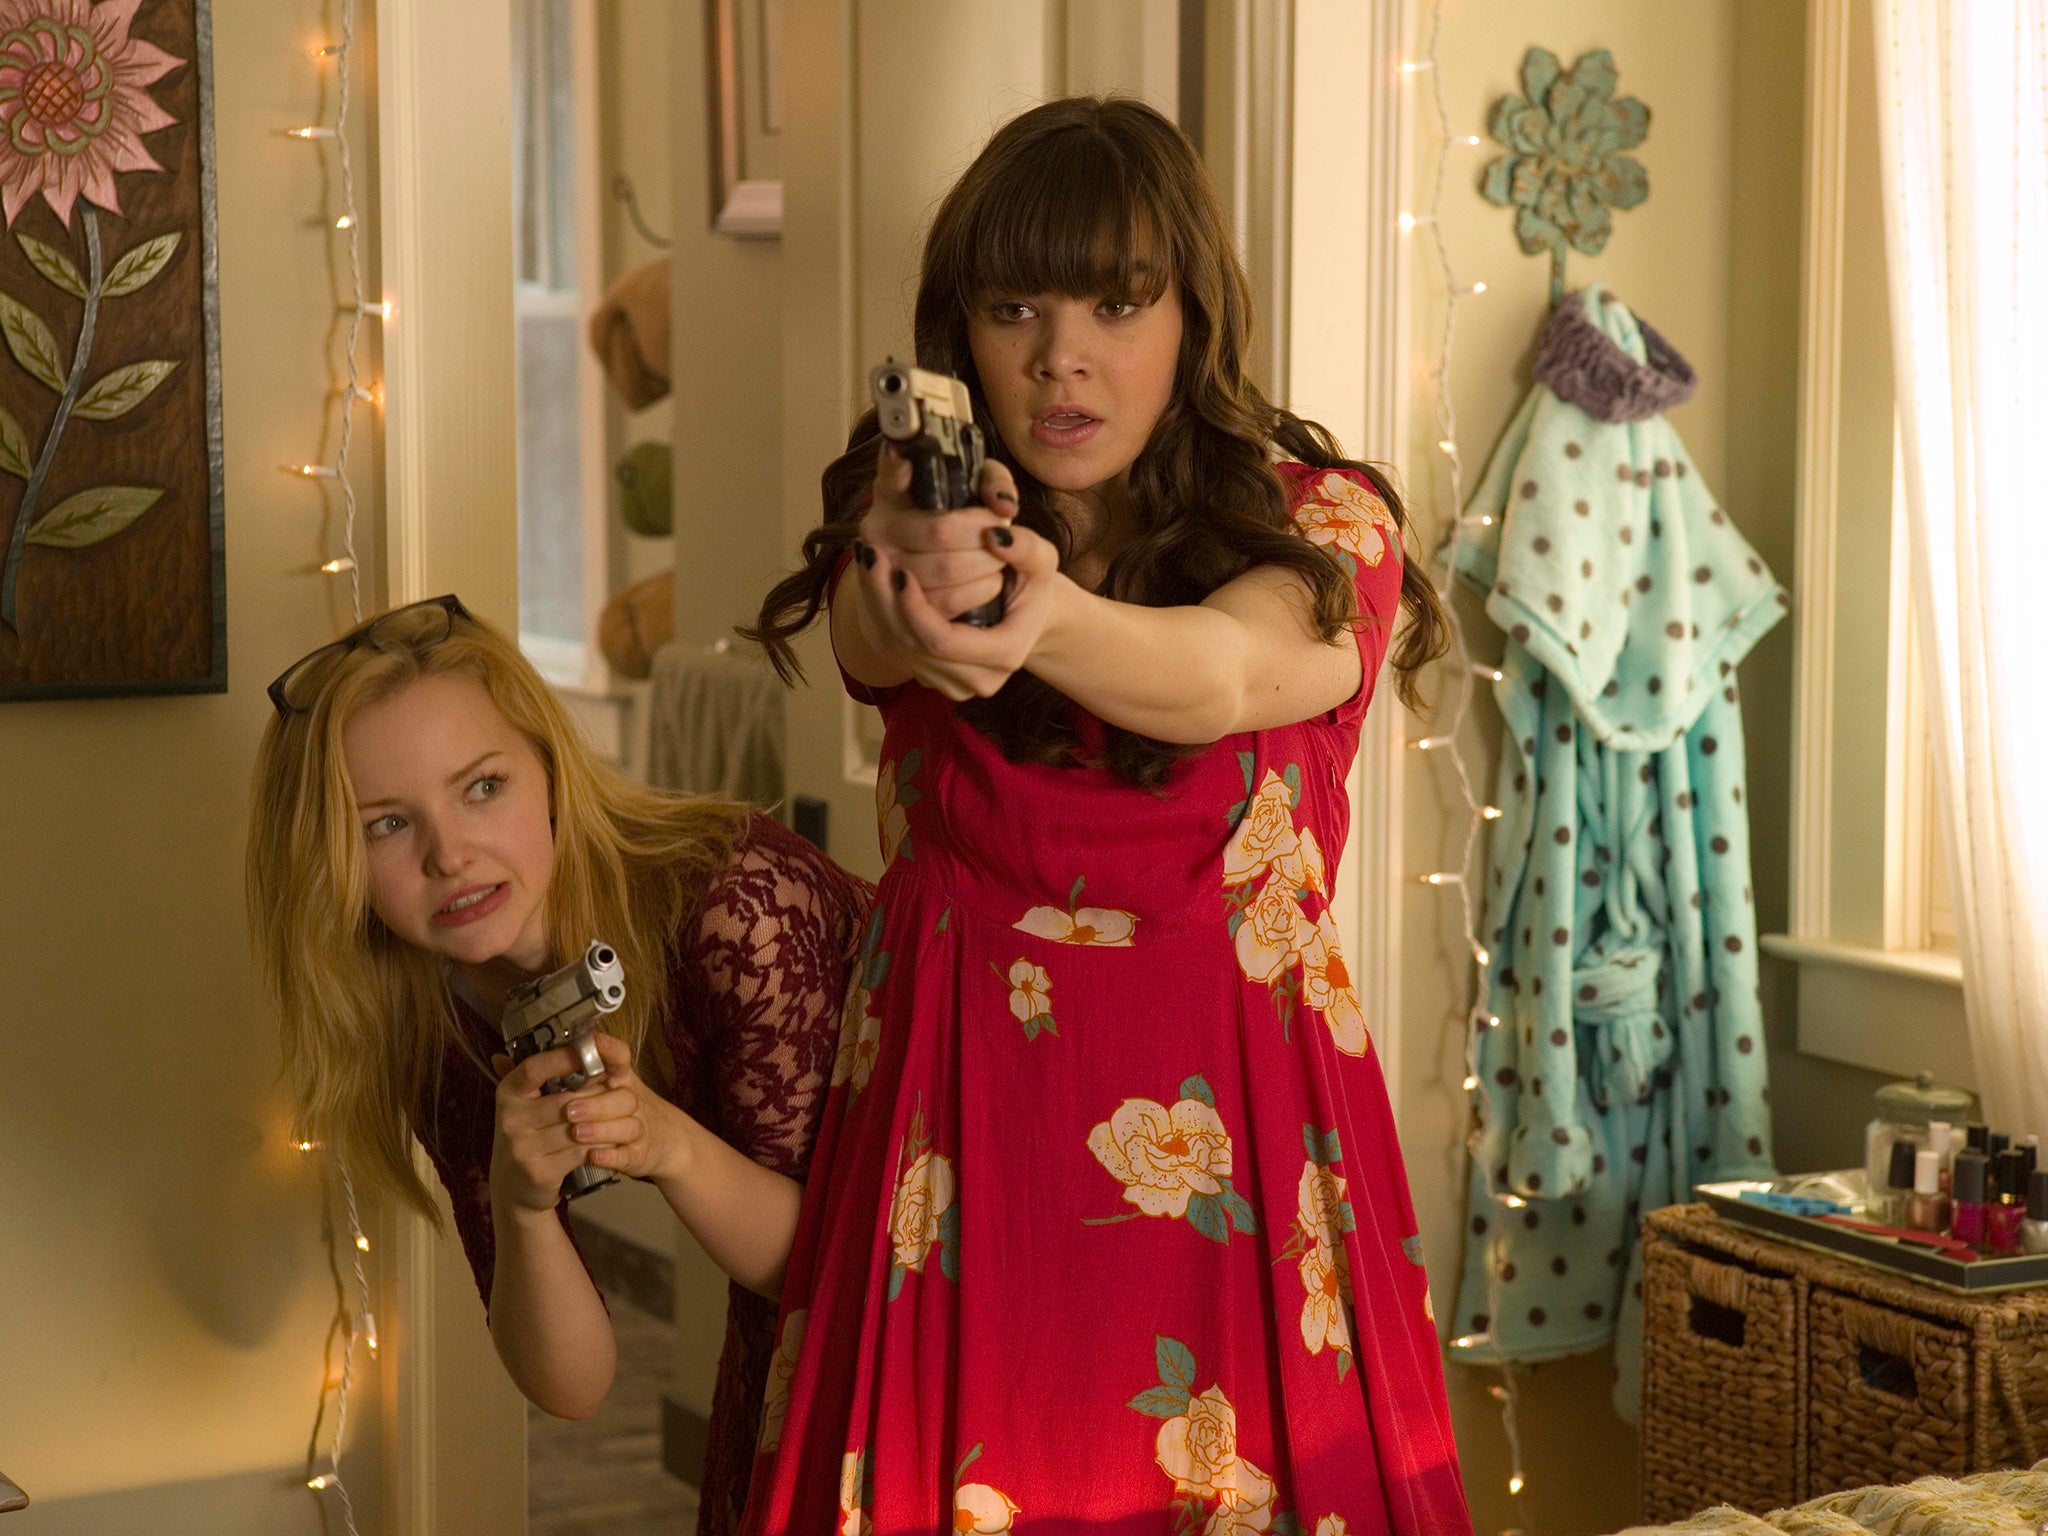 Sophie Turner and Hailee Steinfeld in ‘Barely Lethal’